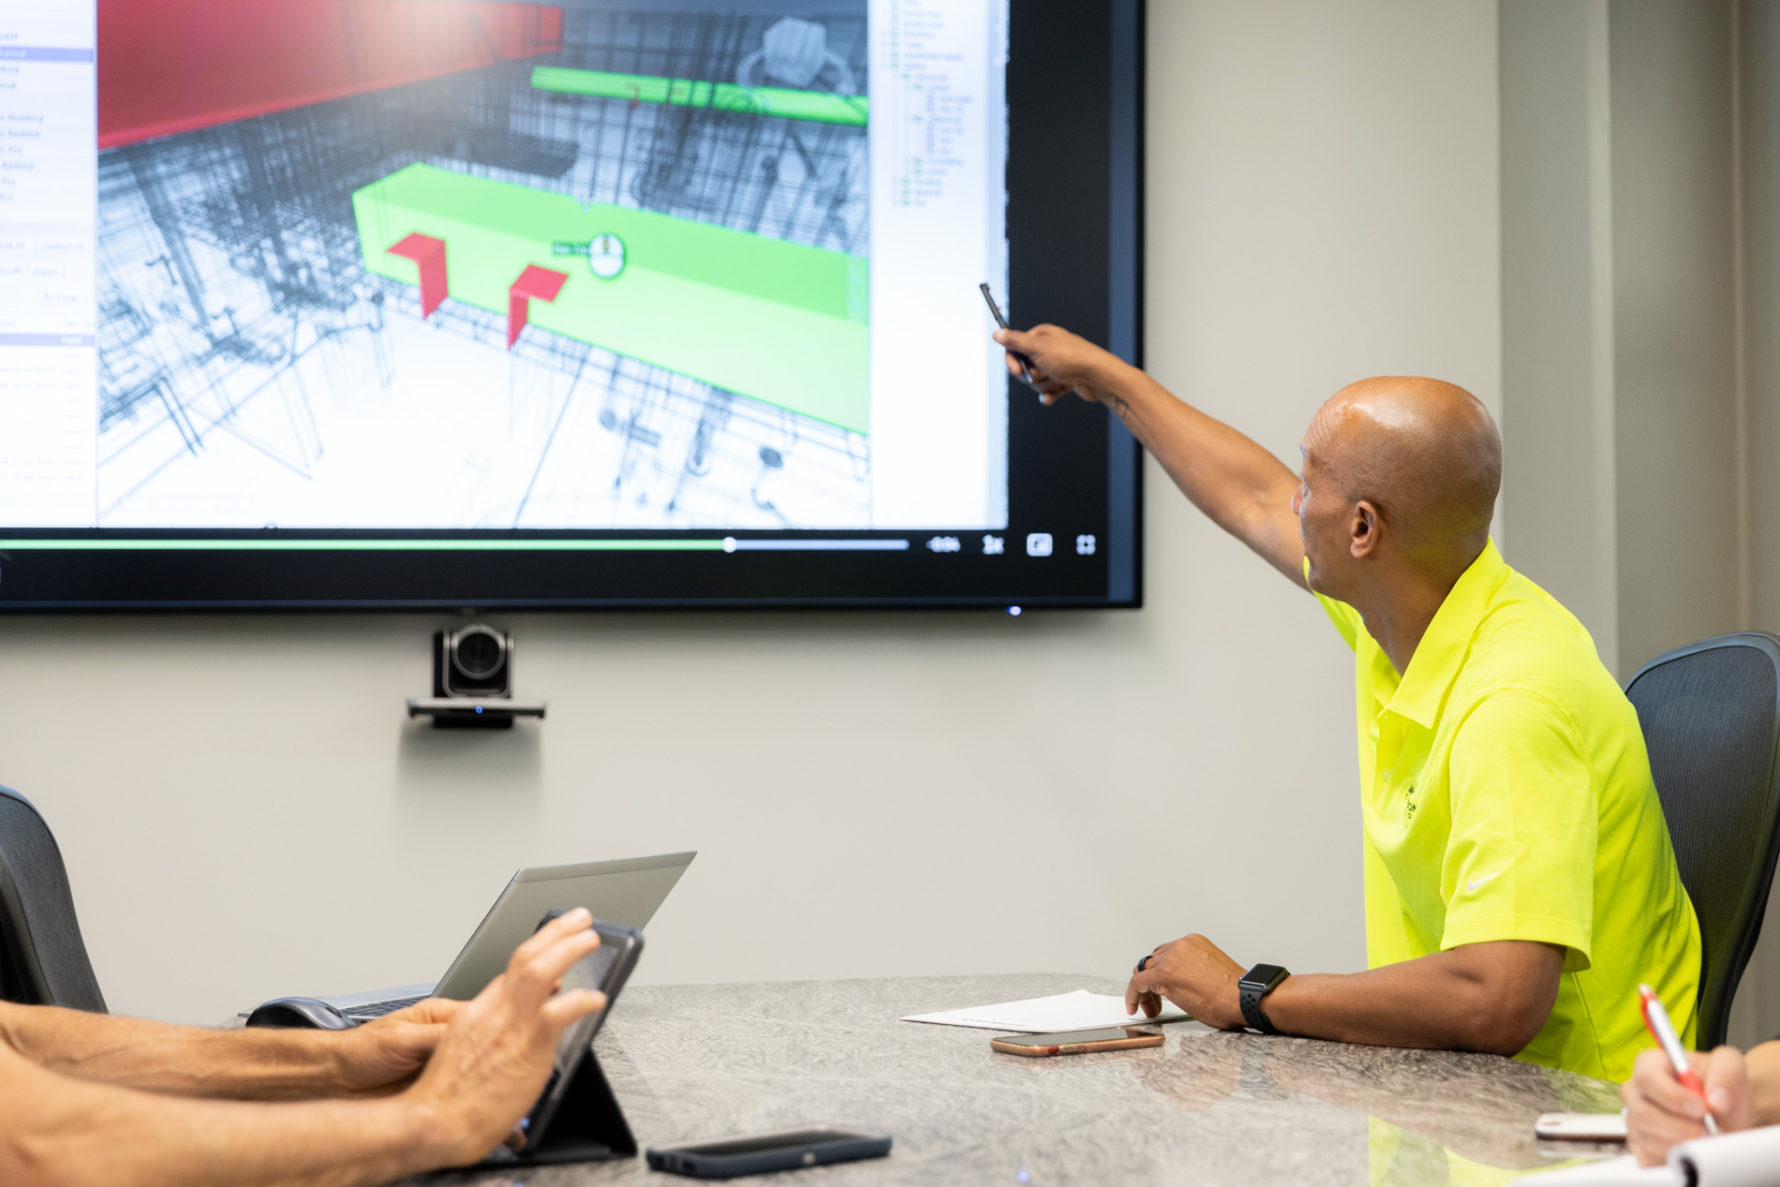 A McCownGordon Construction associate pointing to plans on a screen while in a meeting